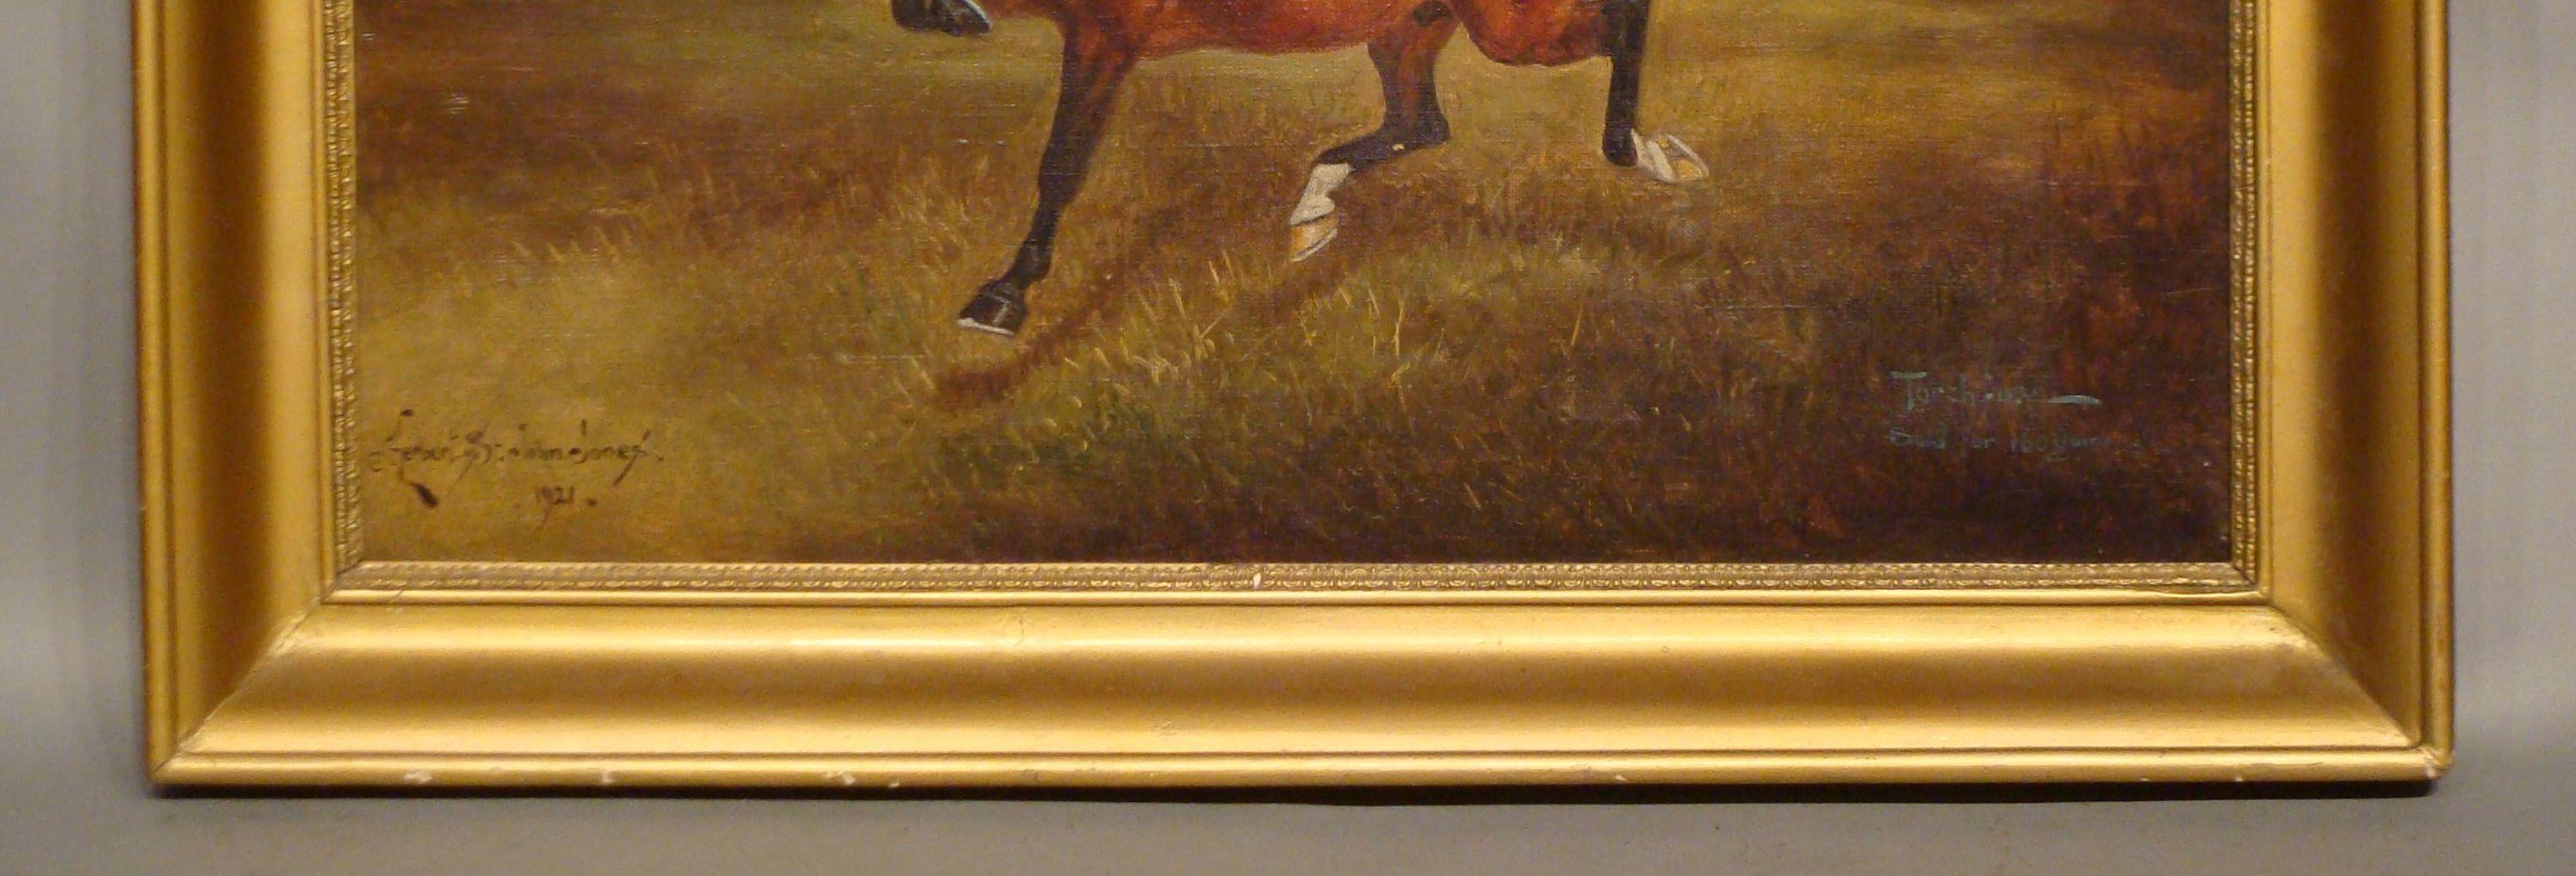 Oil painting of a horse by Herbert St John Jones. A Hackney pony gelding. Signed and dated 1921.

Measures: Height 58 cm (23?), width 73 cm (29?), depth 5 cm (2?)

Oil painting of a horse by Herbert St John Jones. Painting is signed and dated